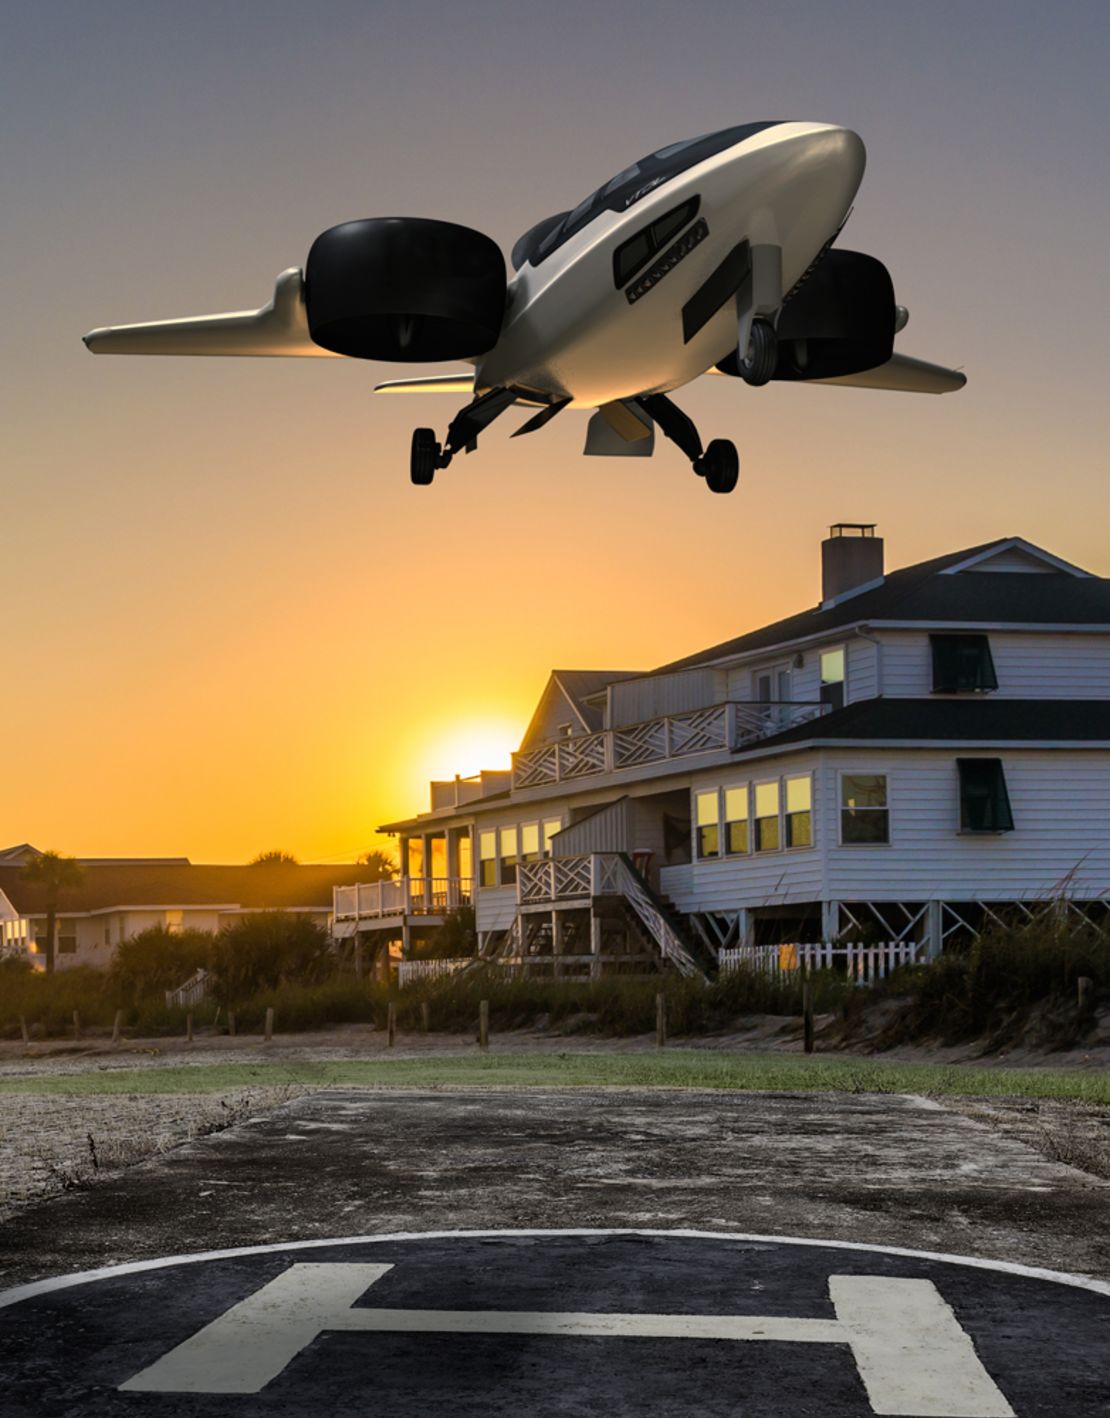 This artist rendering of a TriFan 600 envisions it hovering near a house.